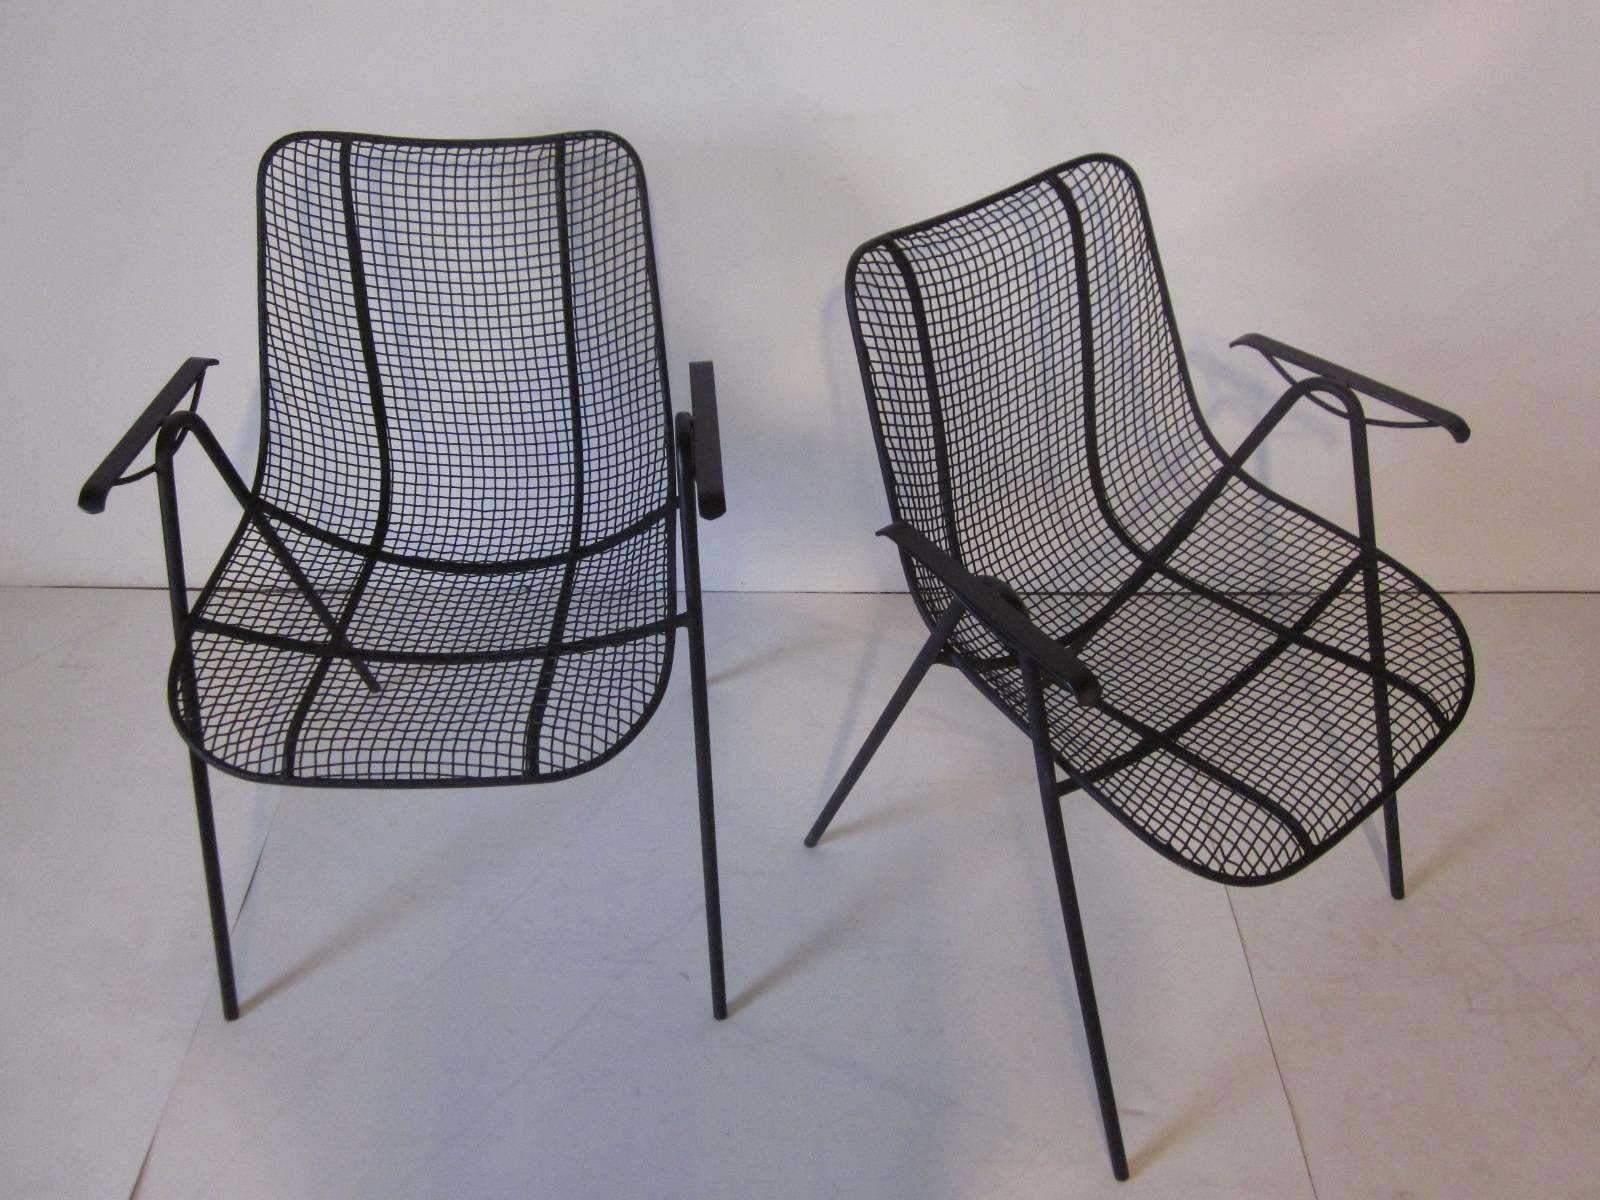 A pair of iron and mesh armchairs, a hard to find style from the Russell Woodard Furniture Company.